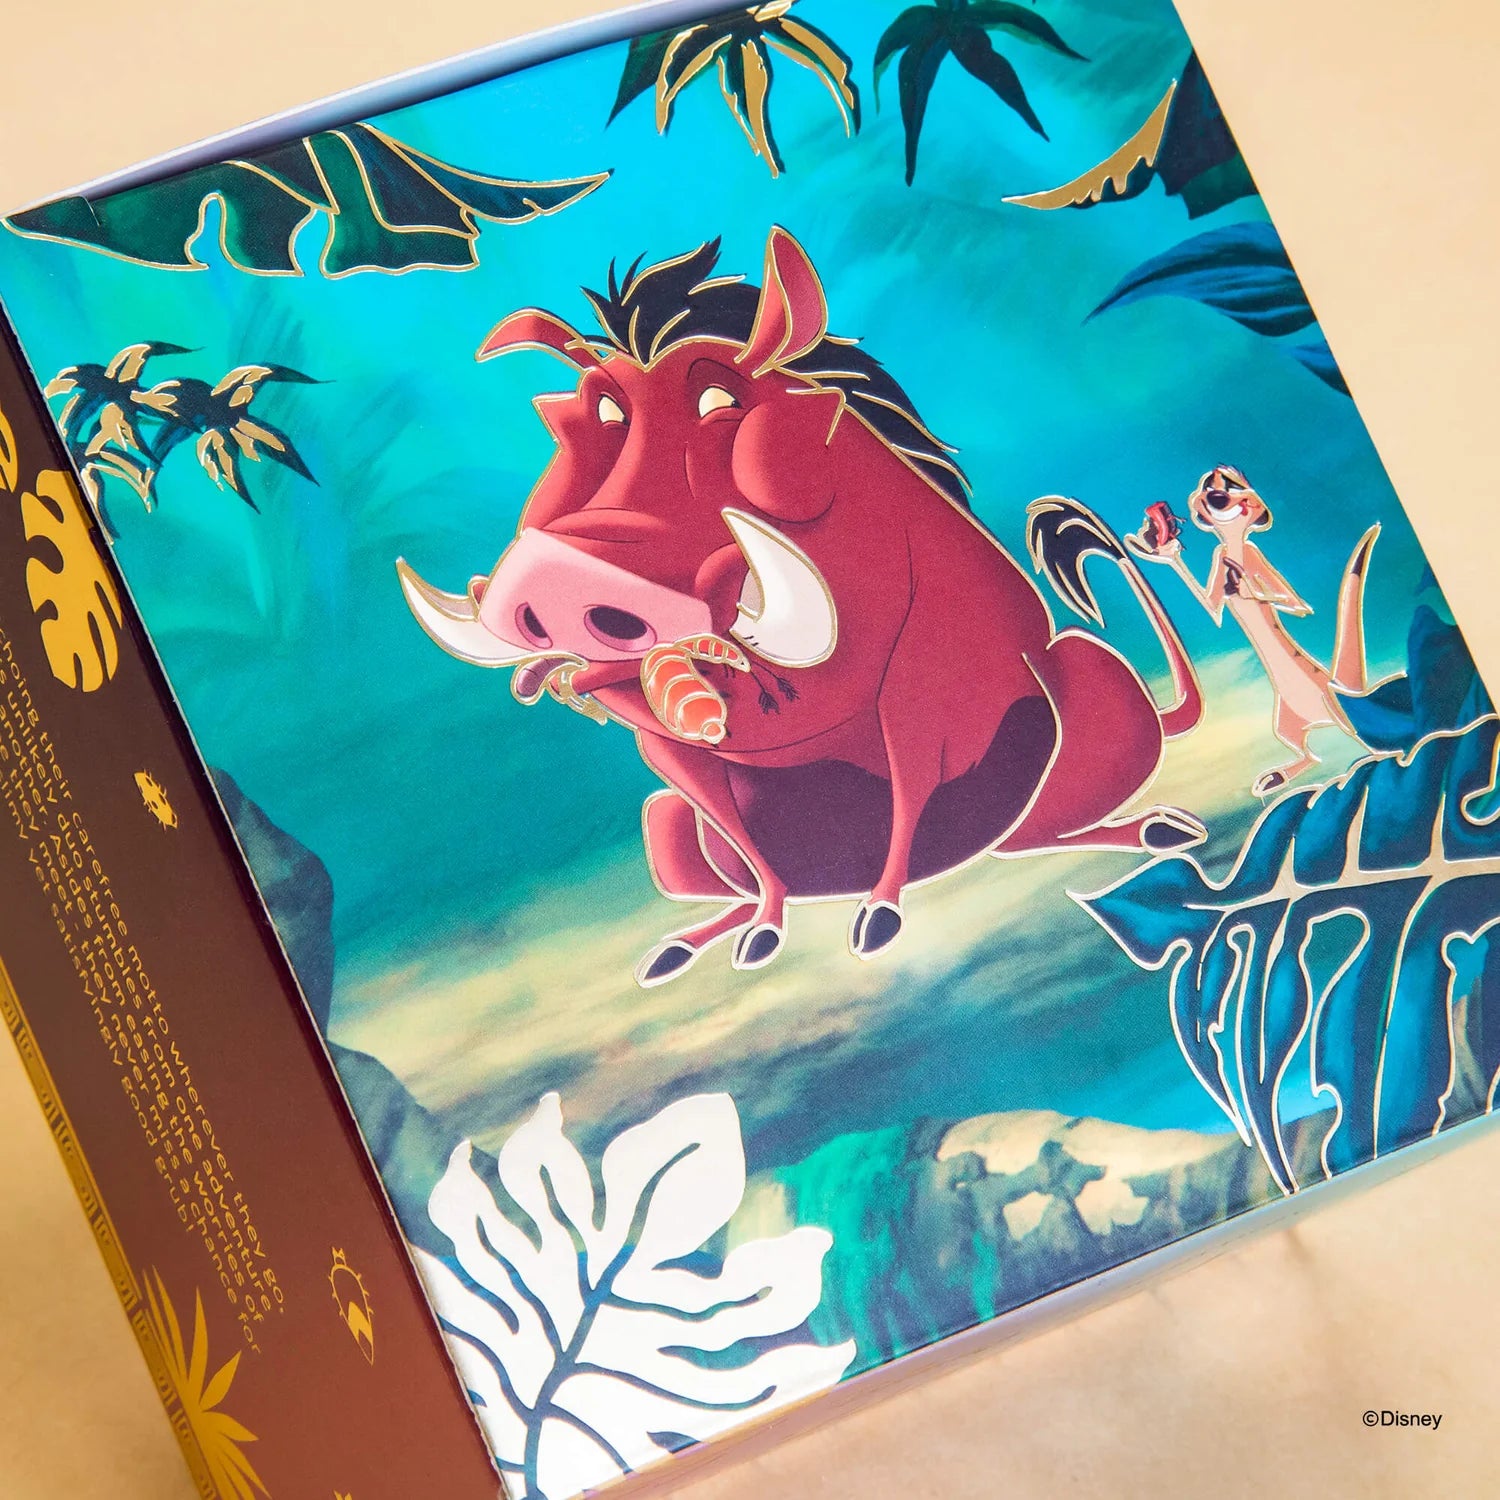 Short Story - The Lion King Timon & Pumbaa Candle